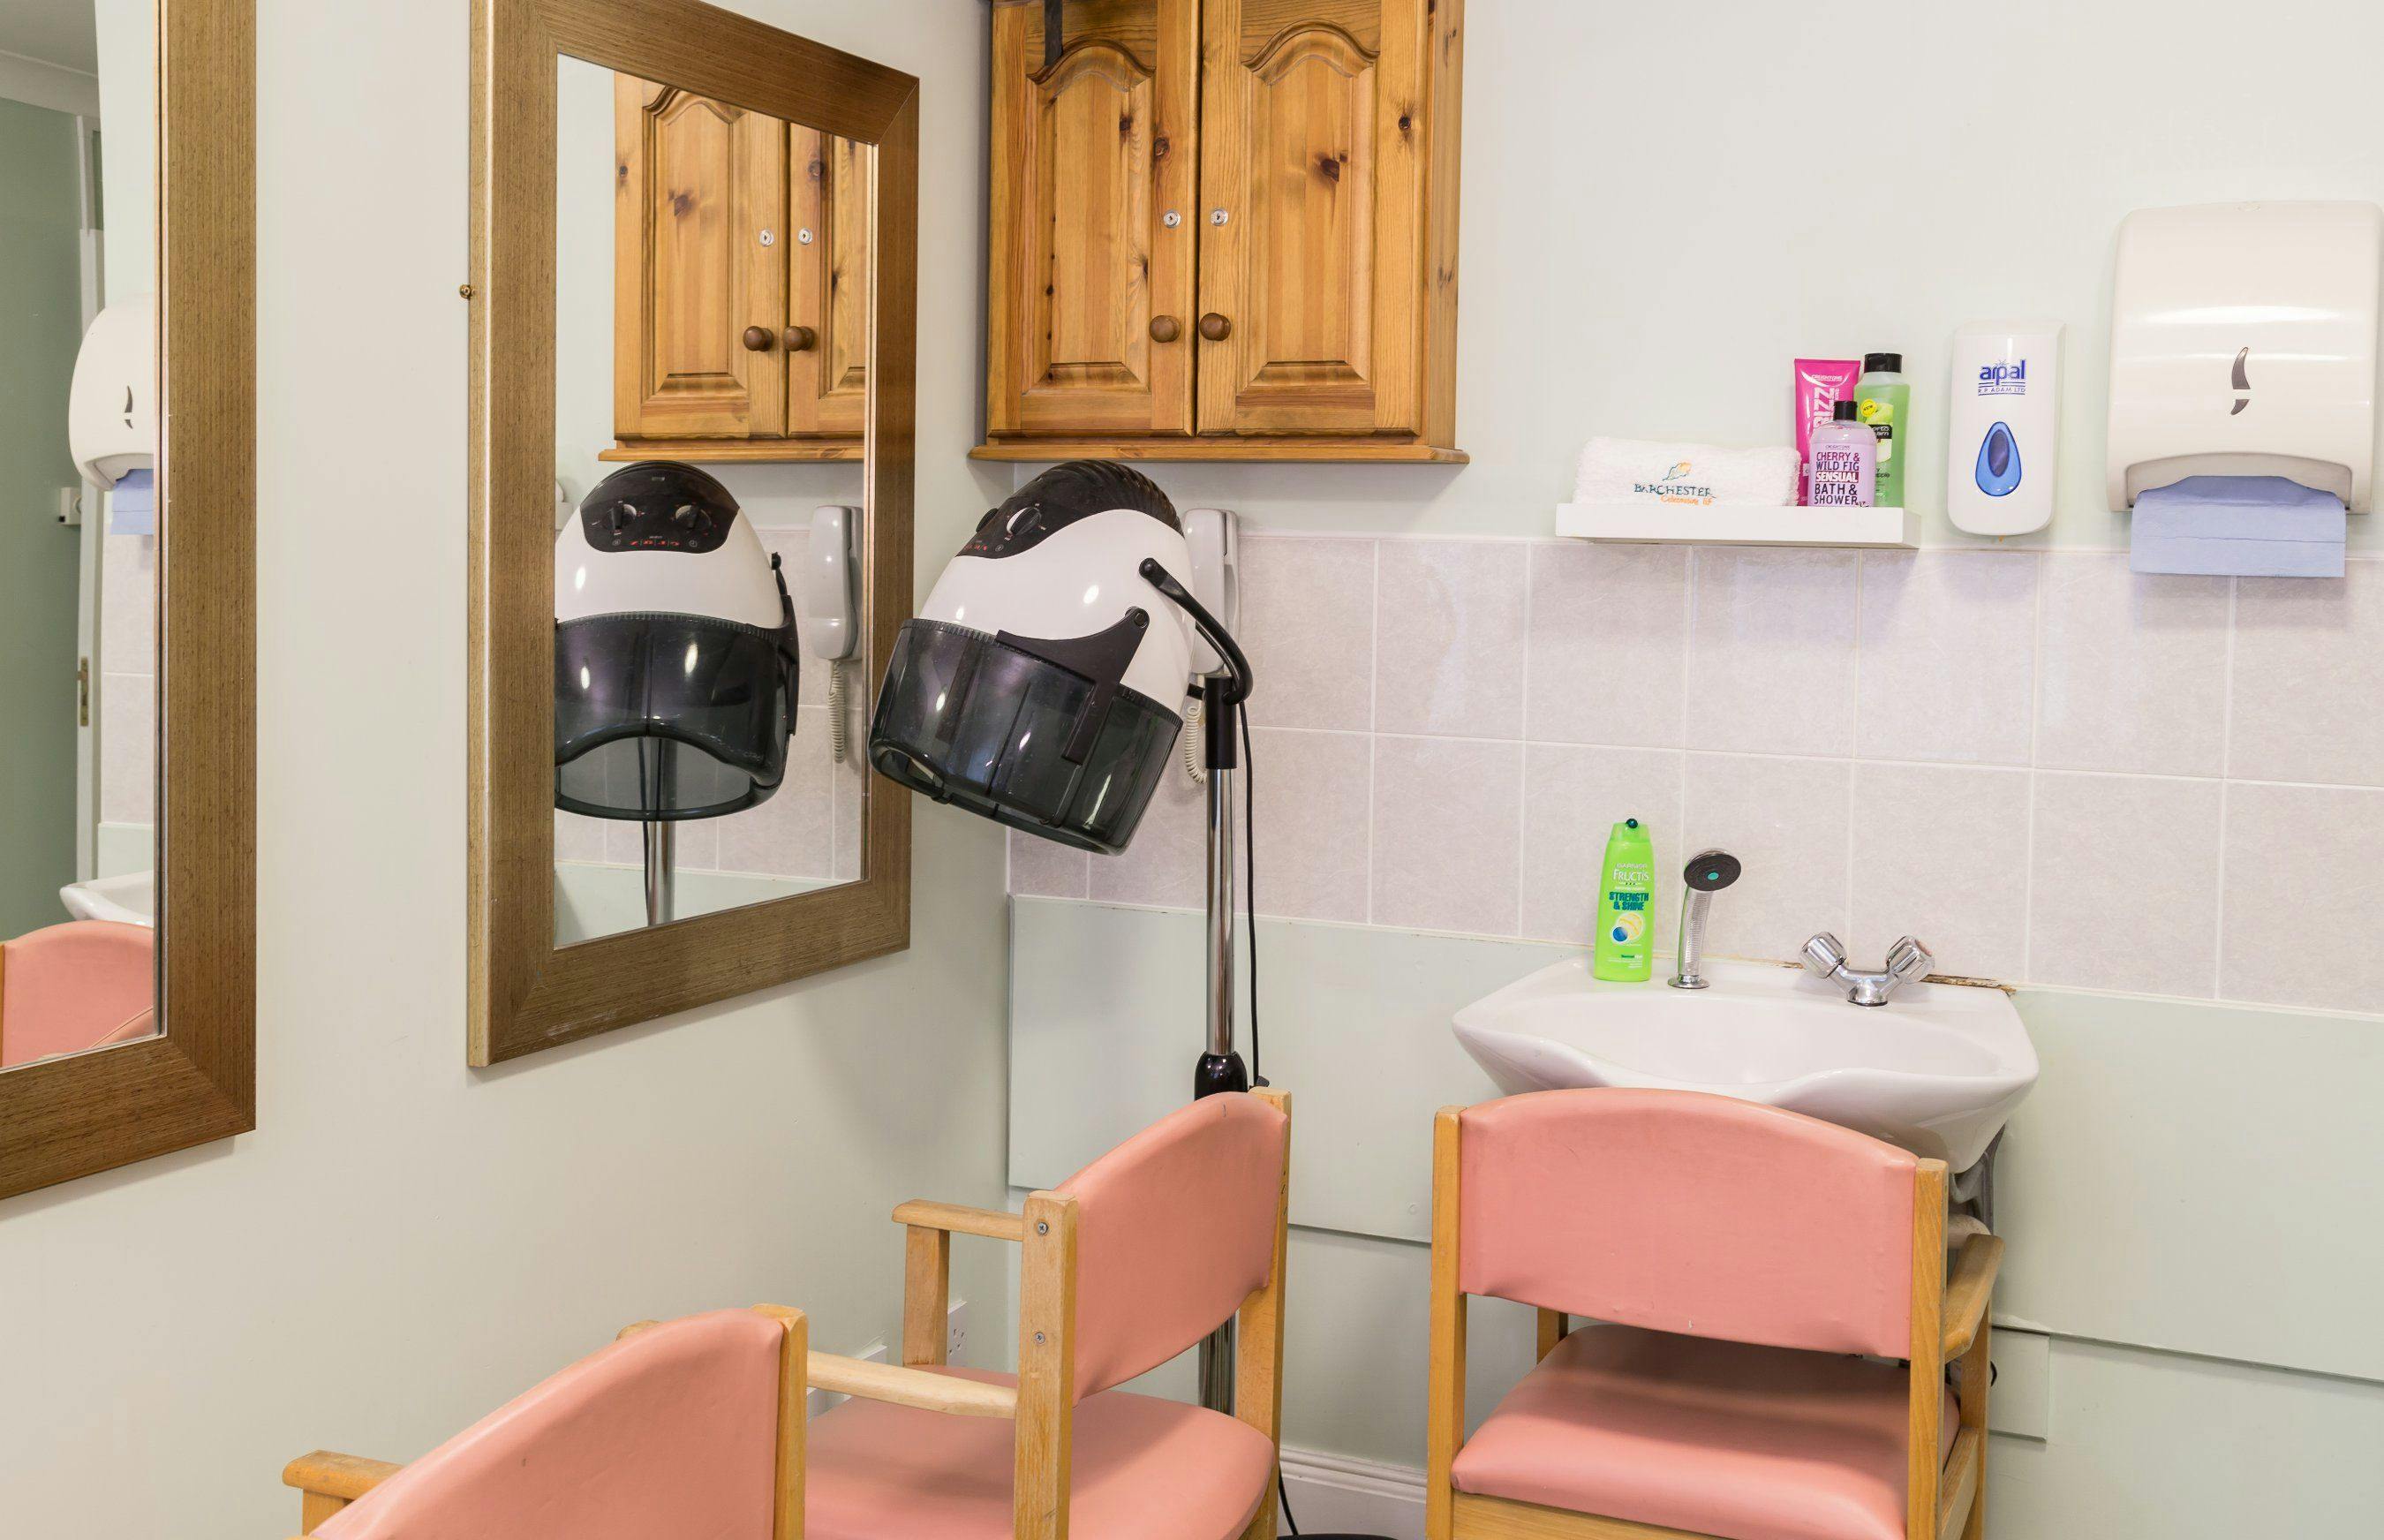 Salon at North Park Care Home in Darlington, North East England